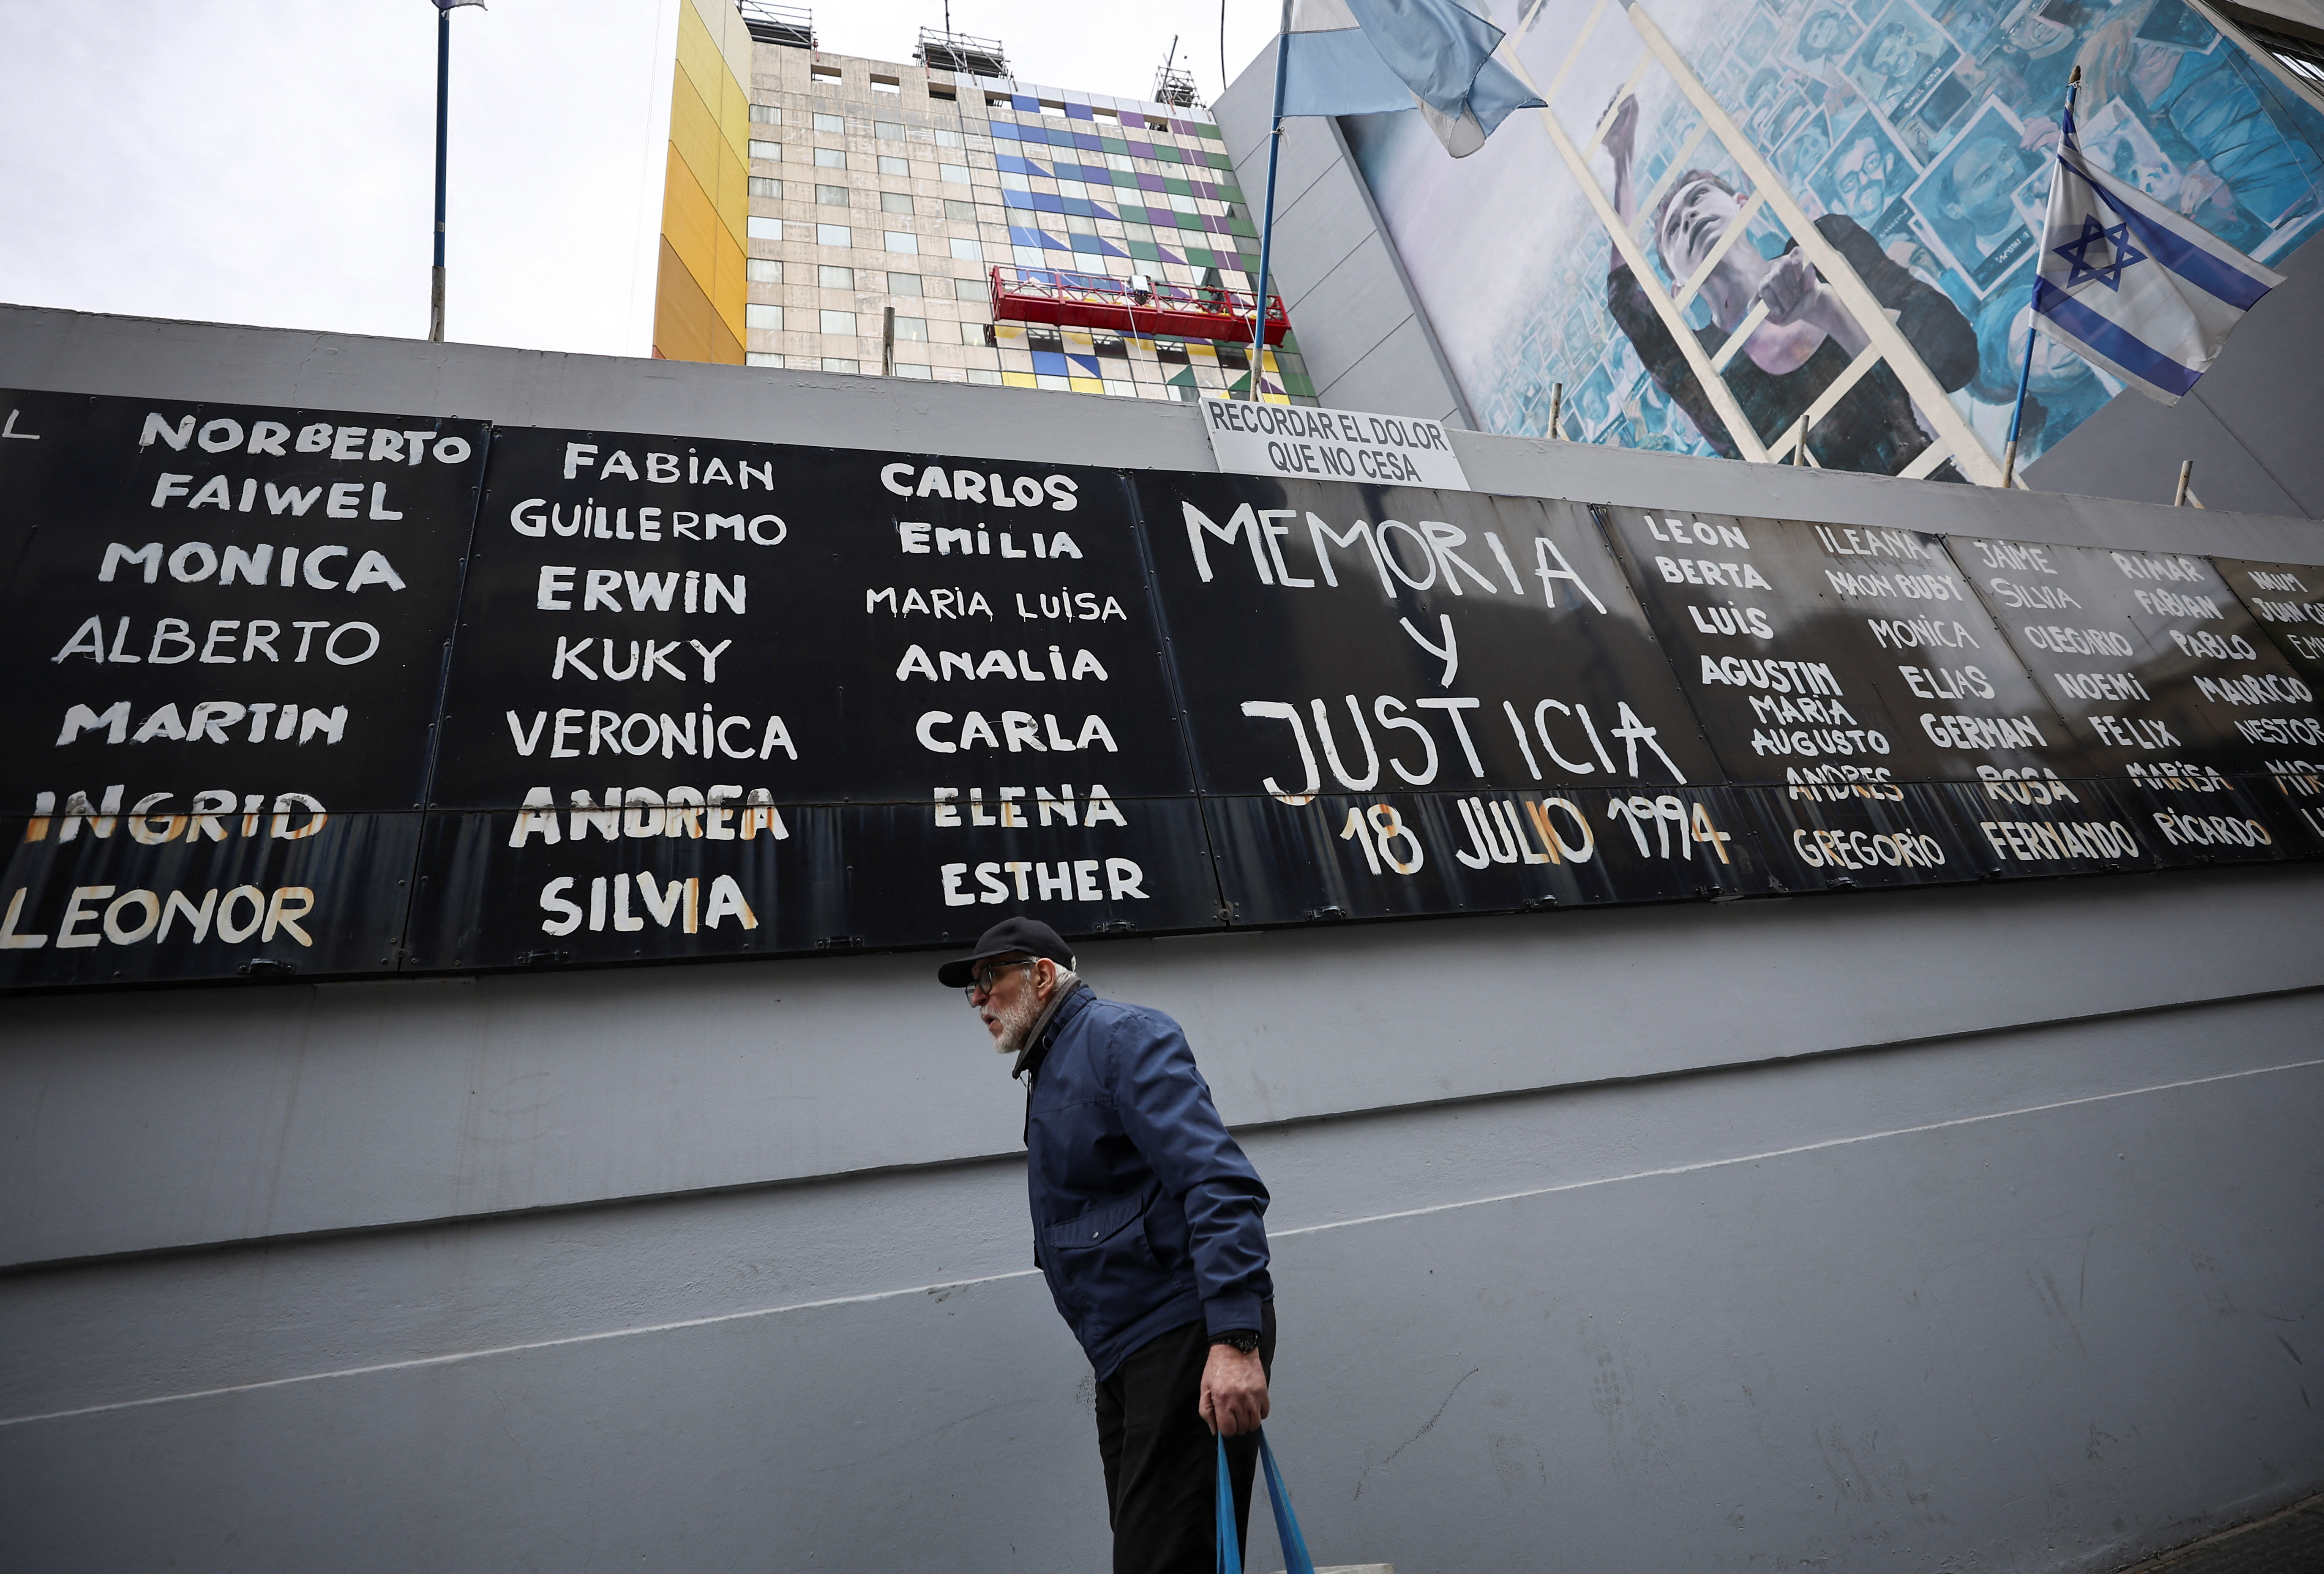 Argentina court blames Iran for deadly 1994 bombing of Jewish center